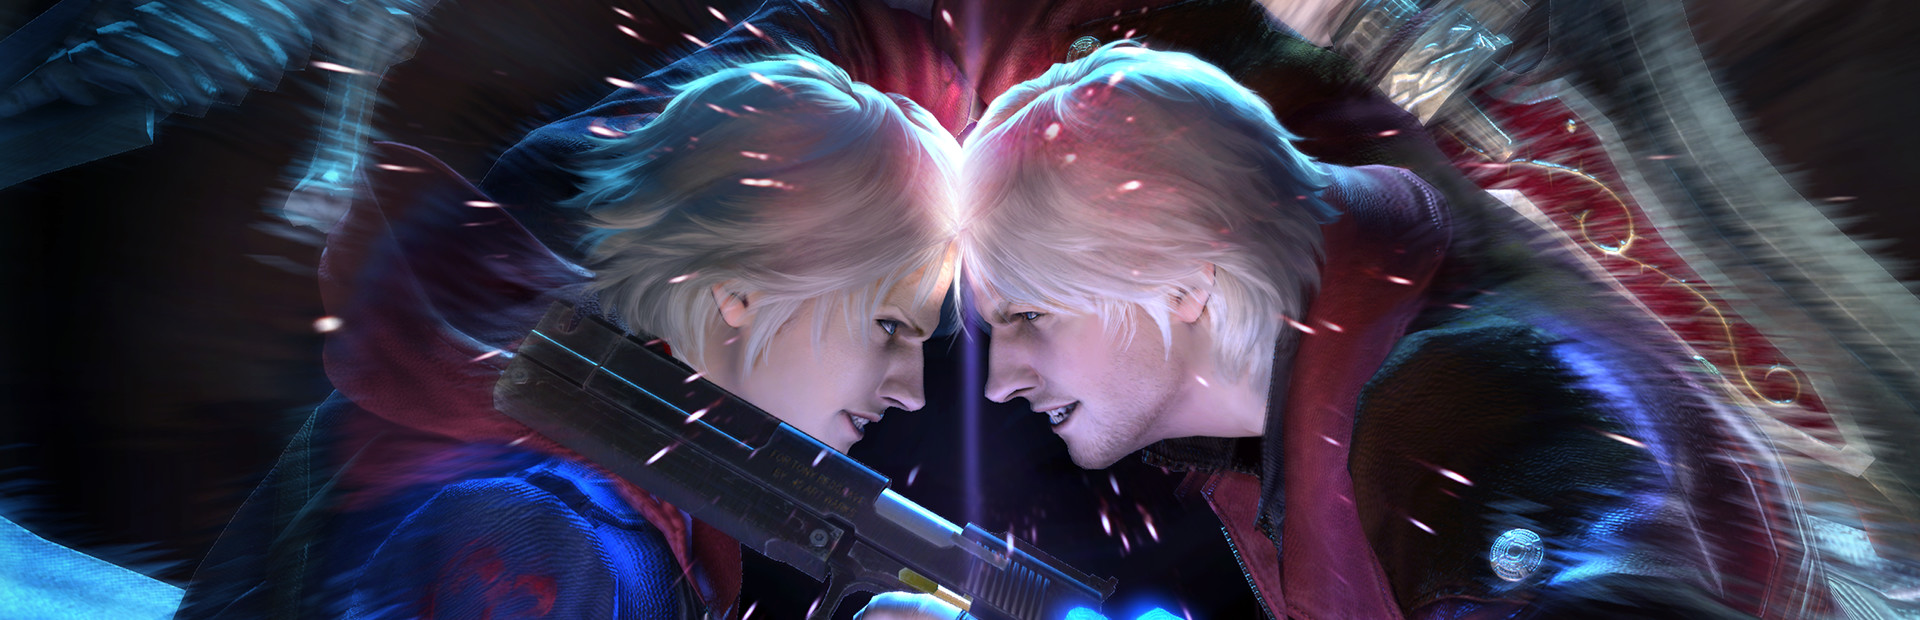 Devil May Cry 4 Special Edition cover image